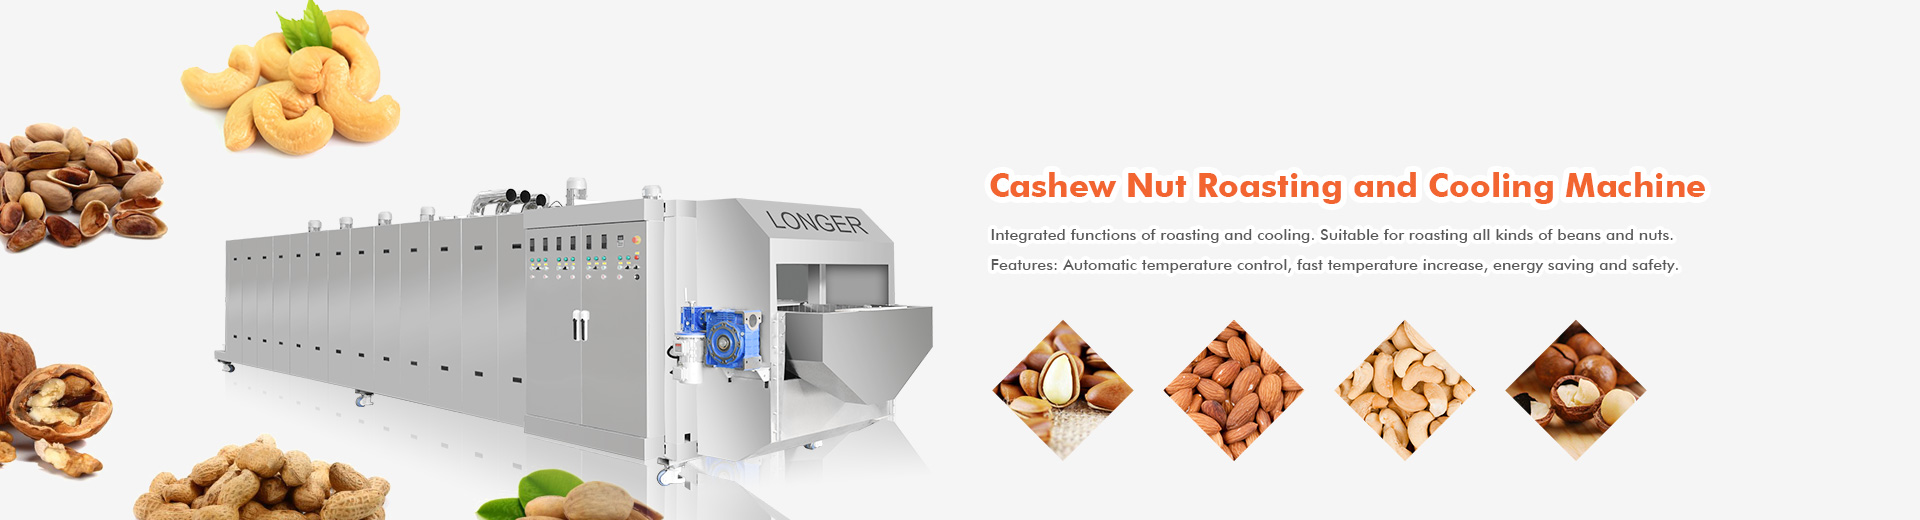 Cashew Nut Roasting and Cooling